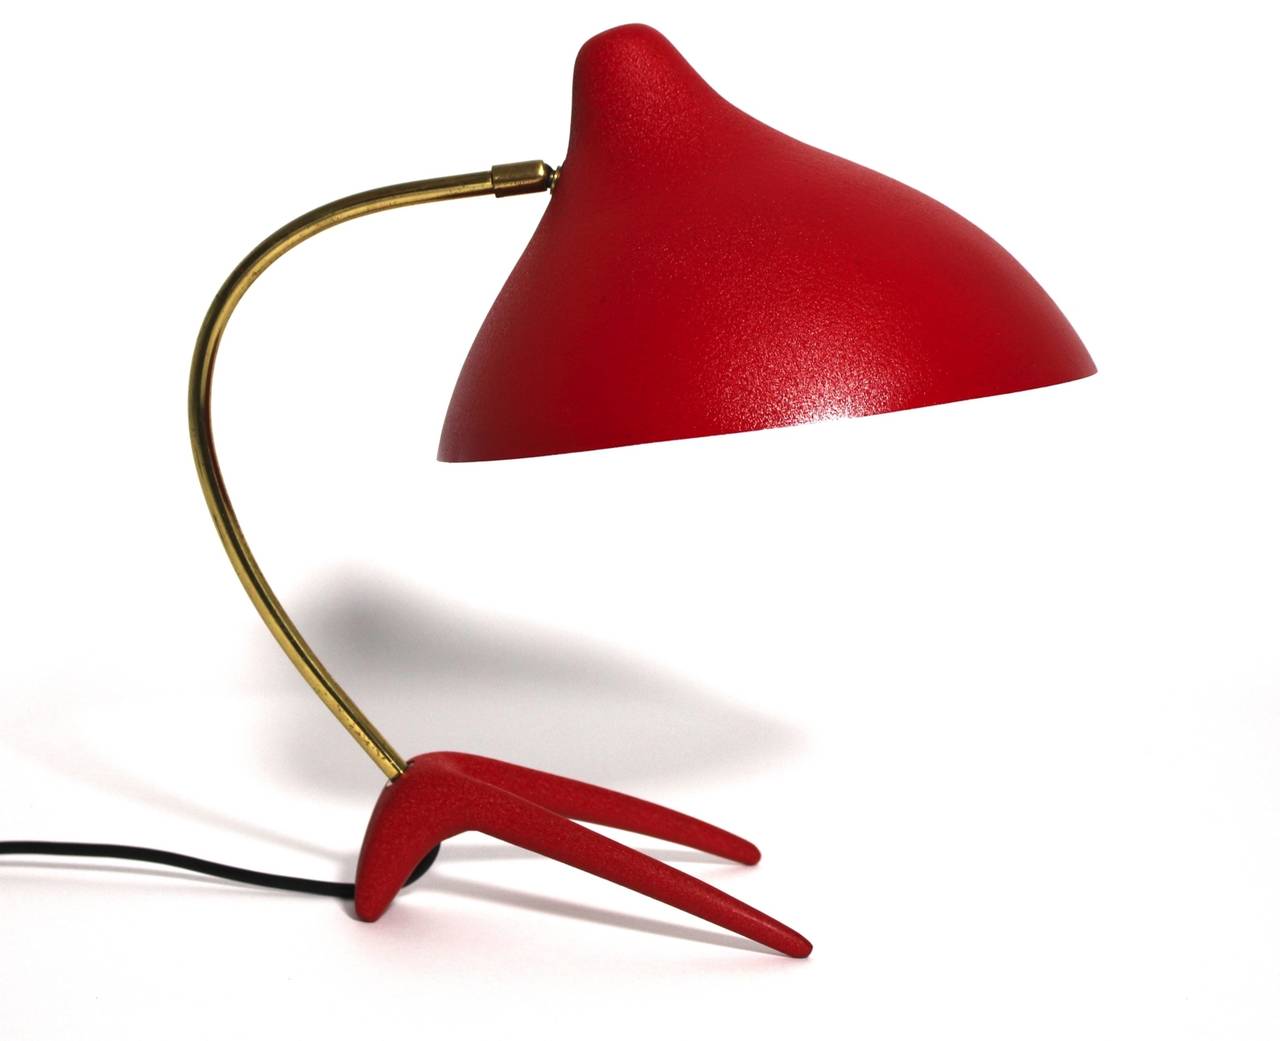 Mid Century Modern tomato red lacquered metal table lamp, which features a cast iron foot,  a curved brass stem, a conical aluminium shade.  The table lamp is in very good original condition.
A design piece of Louis Kalff with the significant iron